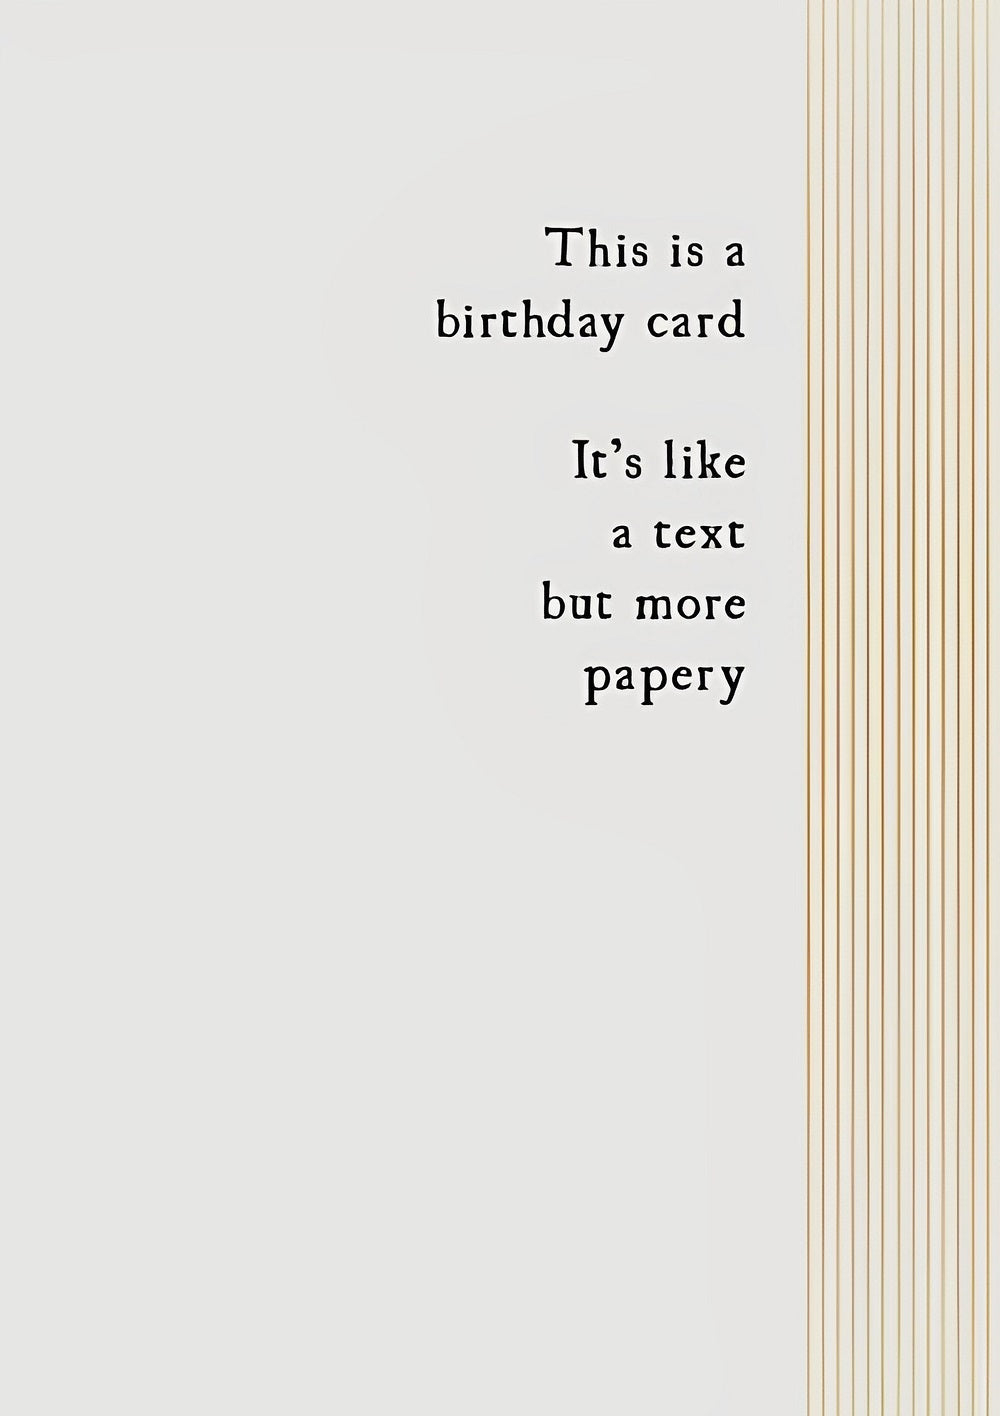 More Papery Birthday Card by penny black